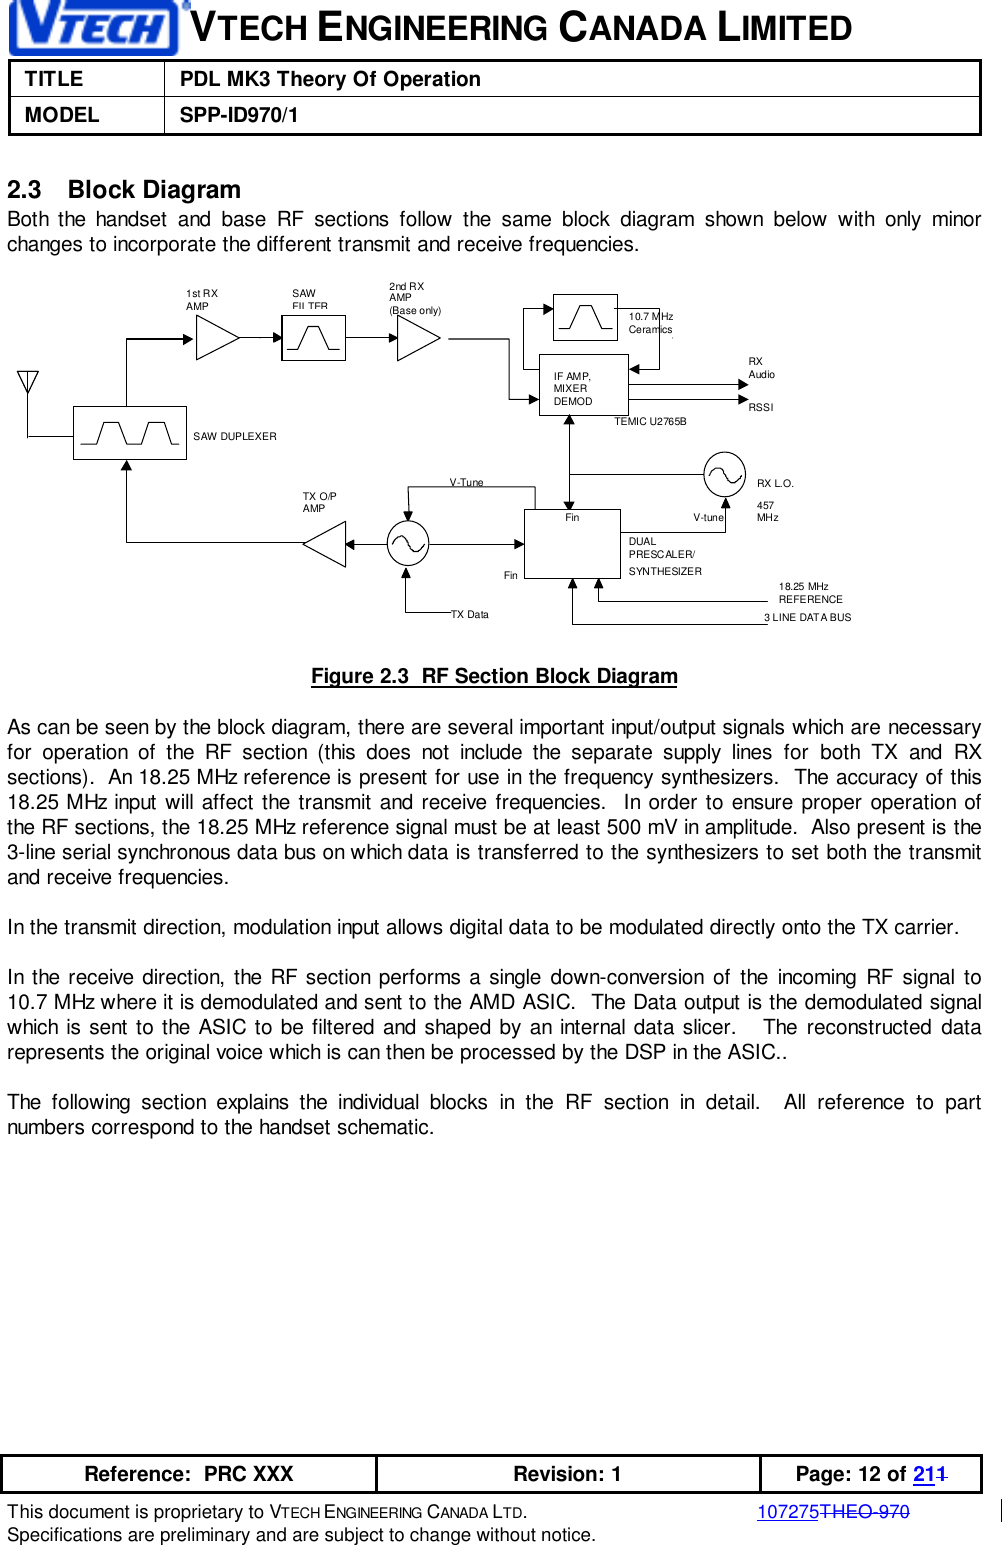 VTECH ENGINEERING CANADA LIMITEDTITLE PDL MK3 Theory Of OperationMODEL SPP-ID970/1Reference:  PRC XXX Revision: 1 Page: 12 of 211This document is proprietary to VTECH ENGINEERING CANADA LTD.107275THEO-970Specifications are preliminary and are subject to change without notice.2.3 Block DiagramBoth the handset and base RF sections follow the same block diagram shown below with only minorchanges to incorporate the different transmit and receive frequencies.SAWFILTERSYNTHESIZER18.25 MHzREFERENCE3 LINE DATA BUSRX L.O.DUALPRESCALER/457MHzFinFin V-tuneV-Tune2nd RXAMP(Base only)IF AMP,MIXERDEMOD1st RXAMPTX O/PAMPTEMIC U2765BTX DataSAW DUPLEXERRXAudio10.7 MHzCeramicsRSSIFigure 2.3  RF Section Block DiagramAs can be seen by the block diagram, there are several important input/output signals which are necessaryfor operation of the RF section (this does not include the separate supply lines for both TX and RXsections).  An 18.25 MHz reference is present for use in the frequency synthesizers.  The accuracy of this18.25 MHz input will affect the transmit and receive frequencies.  In order to ensure proper operation ofthe RF sections, the 18.25 MHz reference signal must be at least 500 mV in amplitude.  Also present is the3-line serial synchronous data bus on which data is transferred to the synthesizers to set both the transmitand receive frequencies.In the transmit direction, modulation input allows digital data to be modulated directly onto the TX carrier.In the receive direction, the RF section performs a single down-conversion of the incoming RF signal to10.7 MHz where it is demodulated and sent to the AMD ASIC.  The Data output is the demodulated signalwhich is sent to the ASIC to be filtered and shaped by an internal data slicer.   The reconstructed datarepresents the original voice which is can then be processed by the DSP in the ASIC..The following section explains the individual blocks in the RF section in detail.  All reference to partnumbers correspond to the handset schematic.